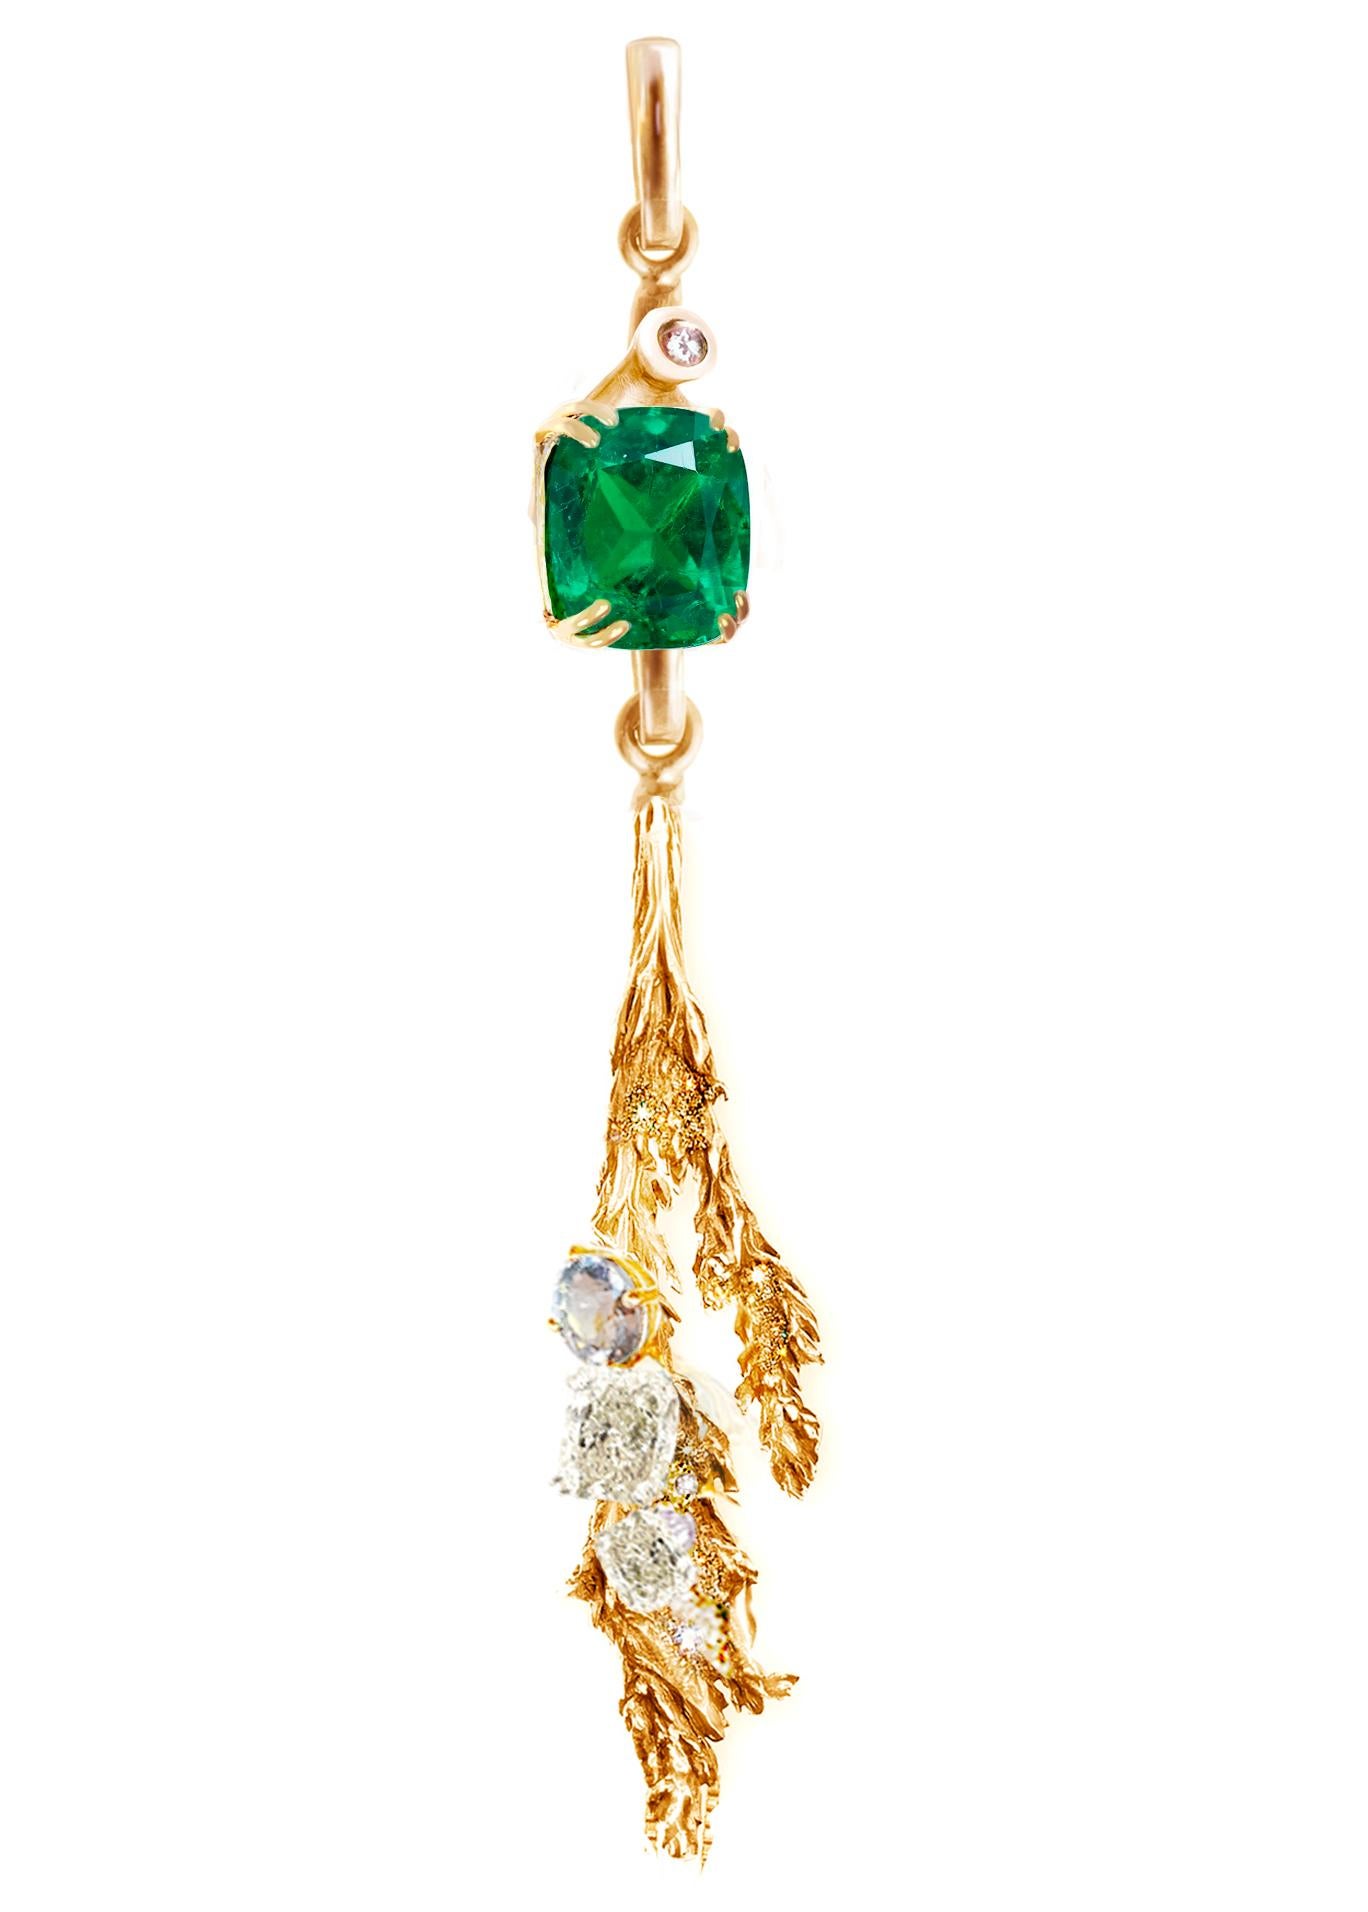 This 6 cm long Juniper brooch is made of 18 karat rose gold and adorned with a 1.29 carat SSEF certified emerald, diamonds, and a sapphire. The green emerald is in octagonal cut, measures 6.94 x 6.15 x 4.75 mm. The two diamonds are SI and F/H, the